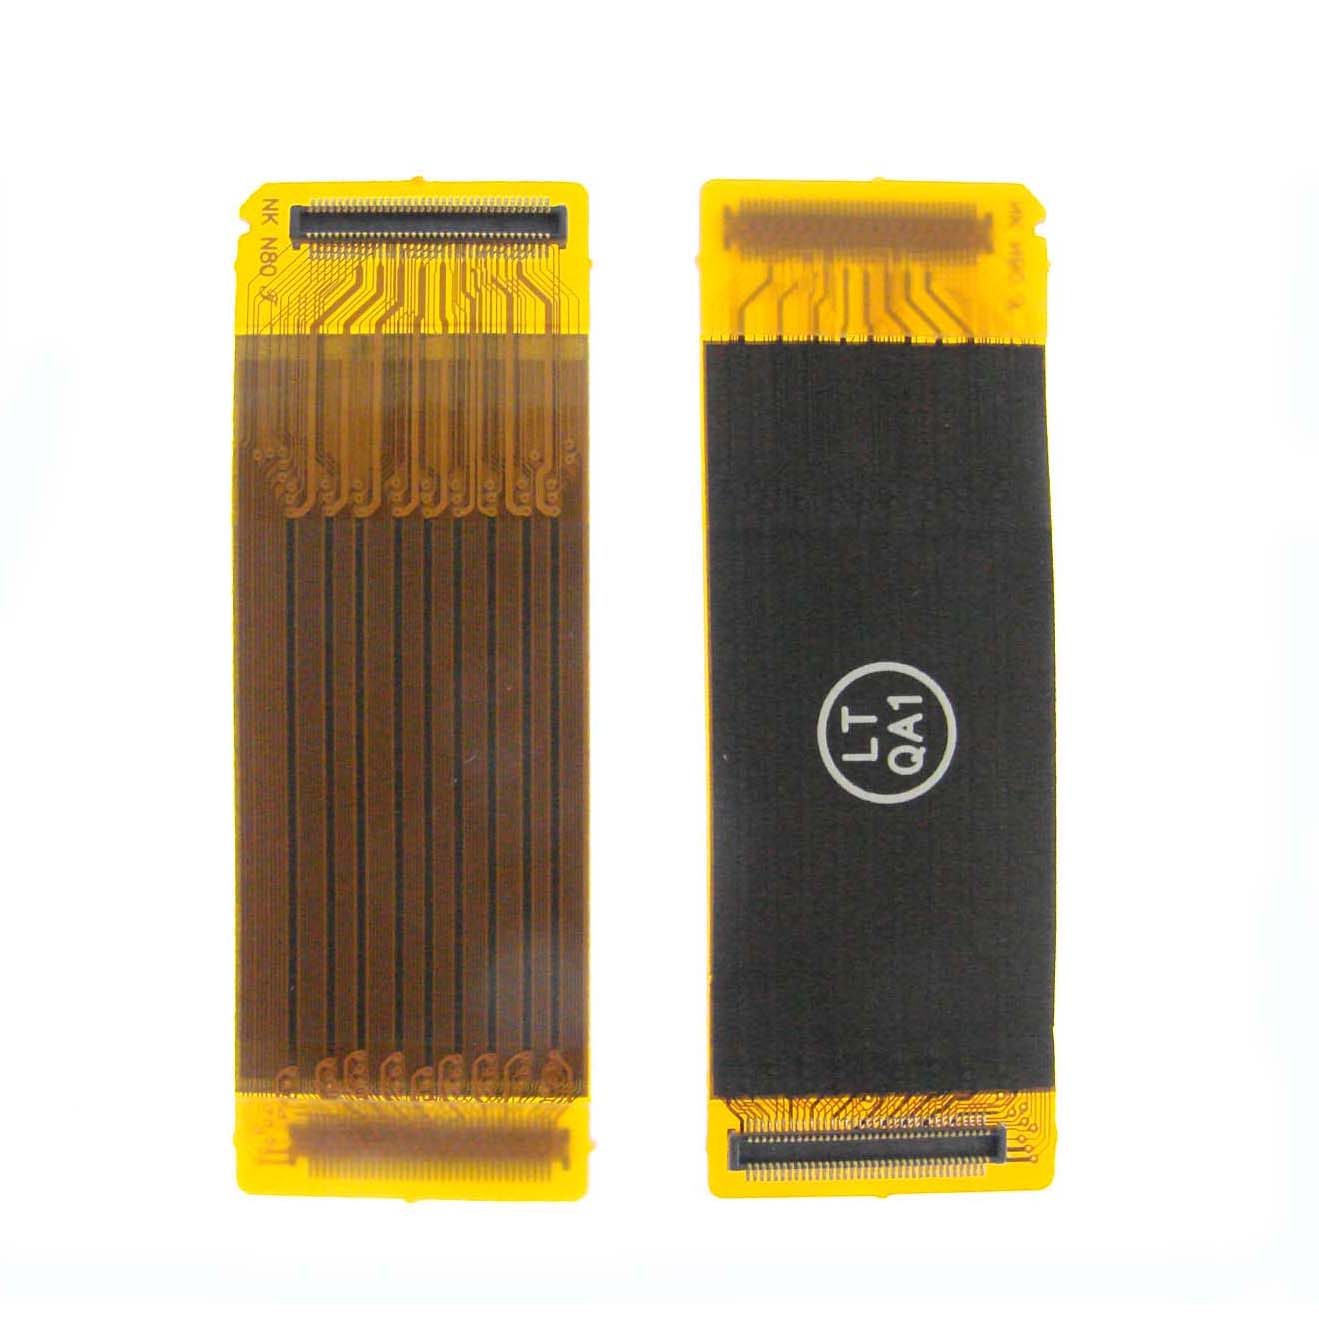 N80 Mobile phone Flex Cables for Nokia